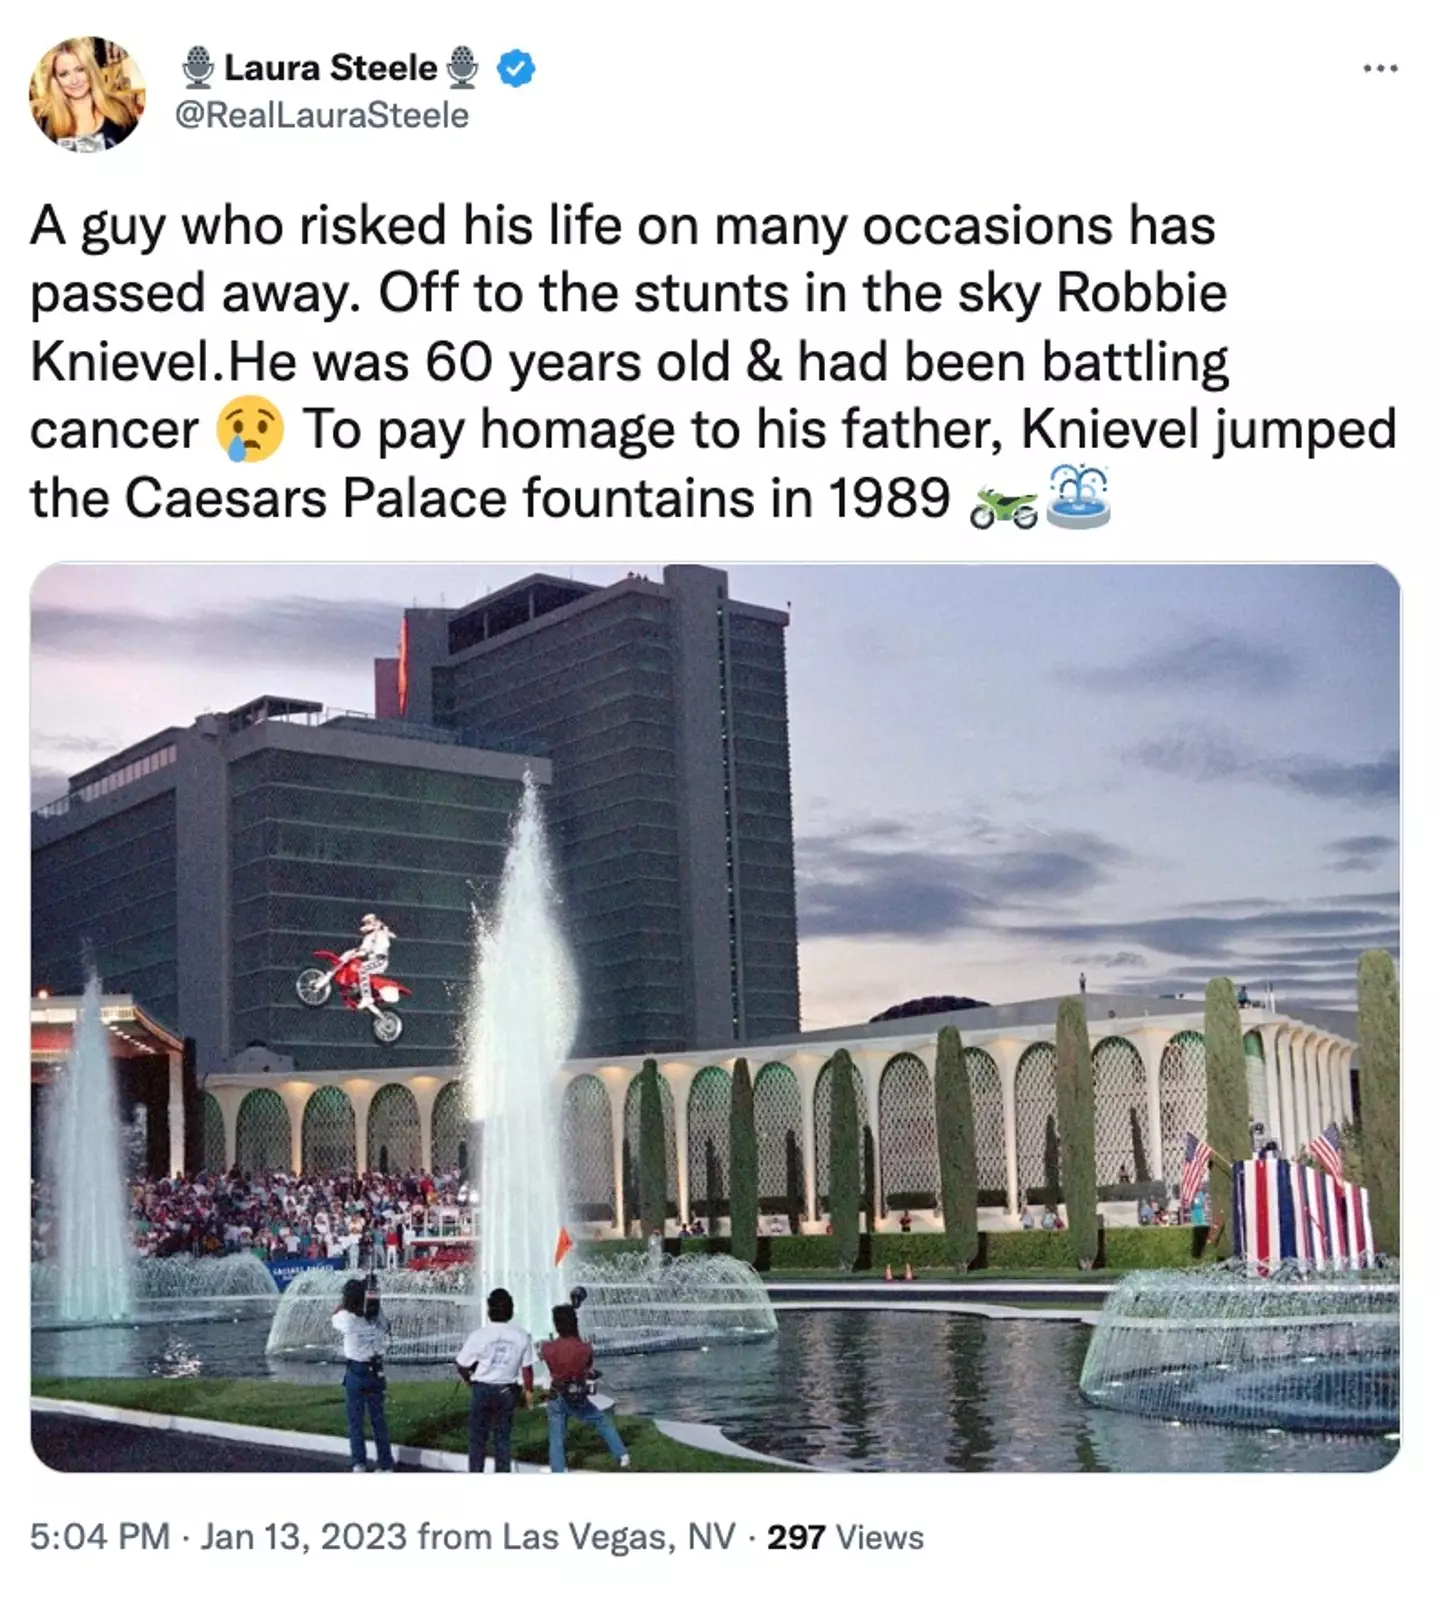 Many remember his Ceasars Palace feat.